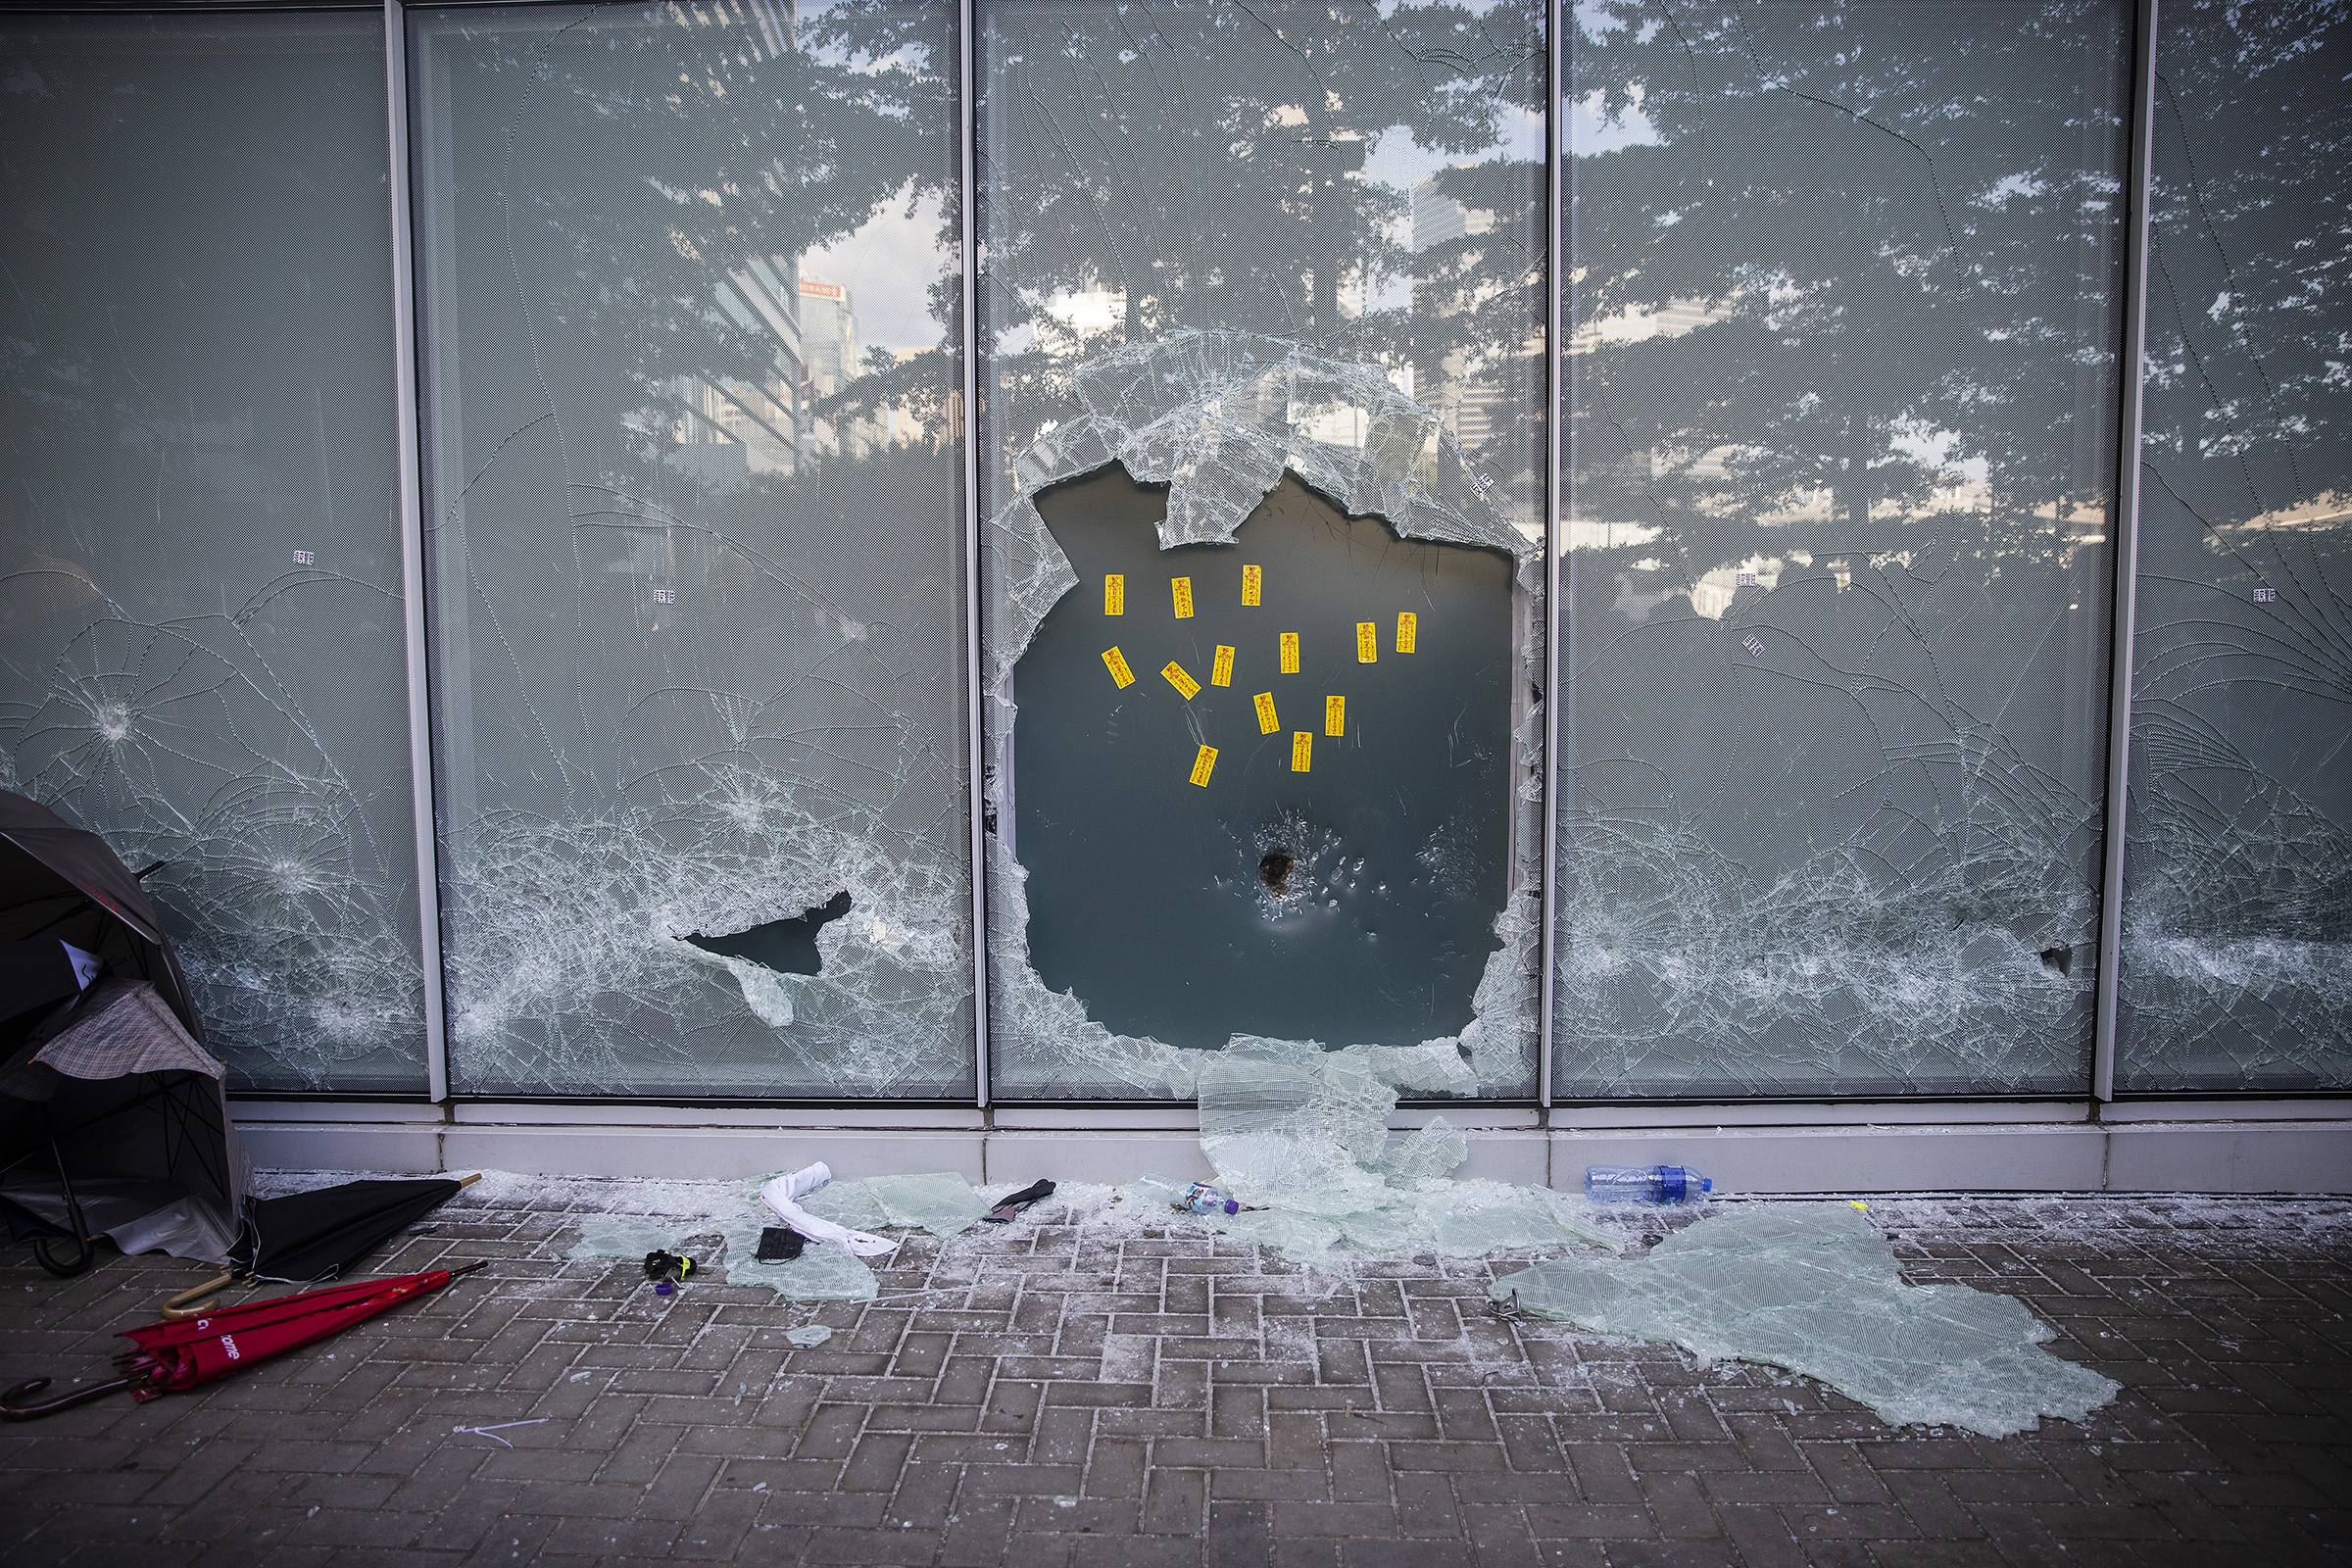 A broken window at the Legislative Council building during a protest in Hong Kong on July 1, 2019. (Justin Chin—Bloomberg/Getty Images)